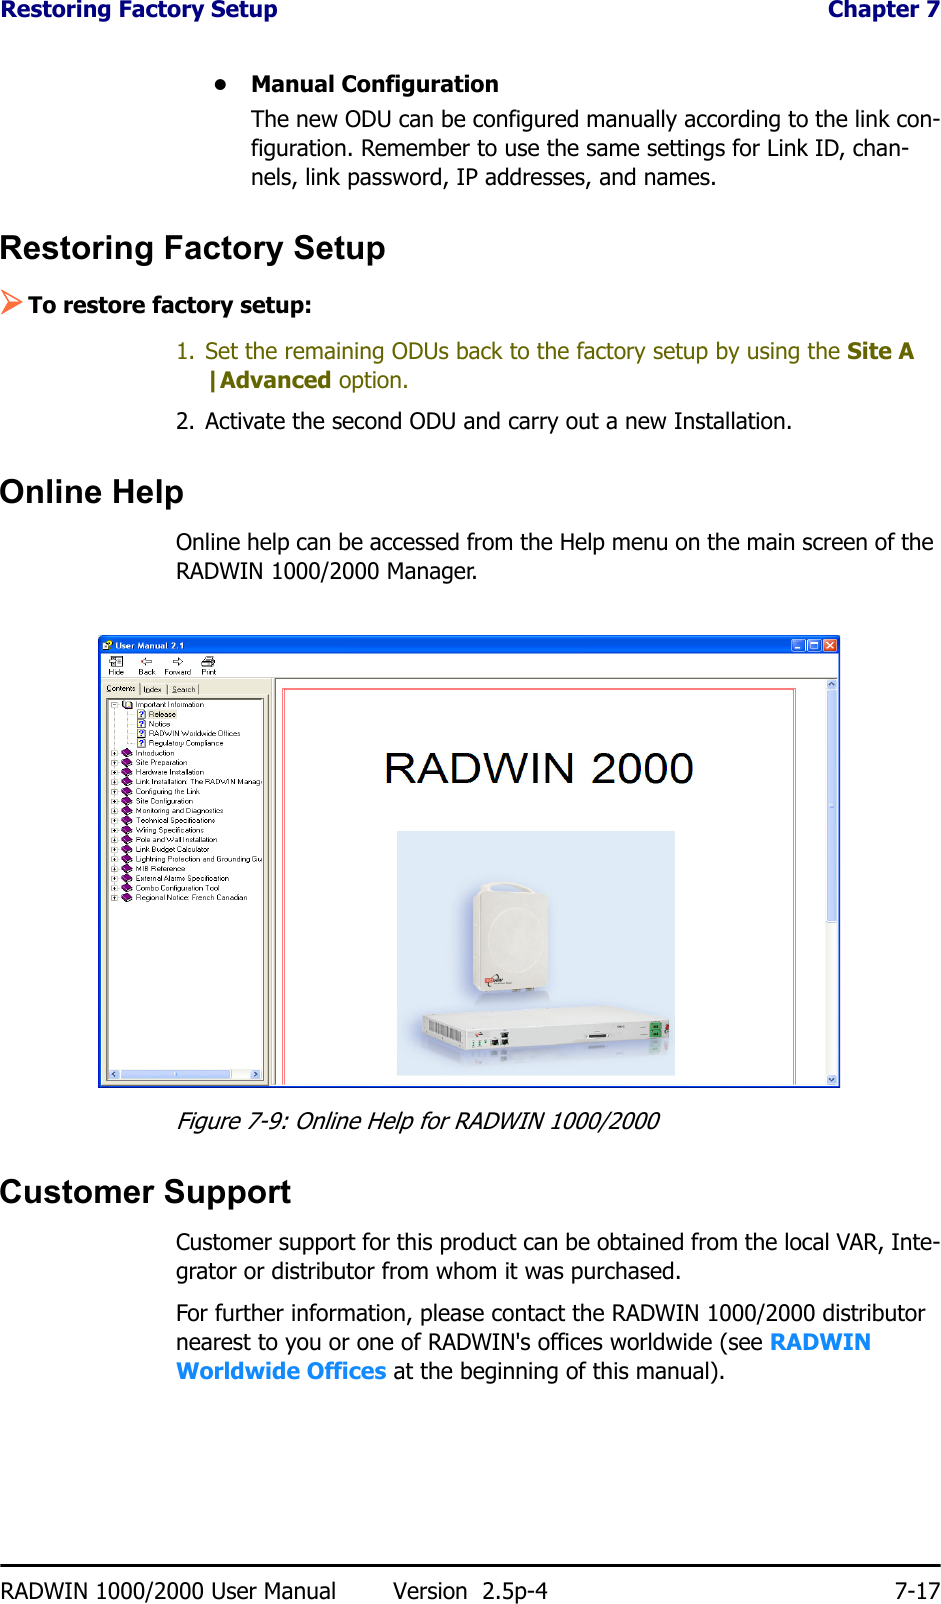 Restoring Factory Setup  Chapter 7RADWIN 1000/2000 User Manual Version  2.5p-4 7-17• Manual ConfigurationThe new ODU can be configured manually according to the link con-figuration. Remember to use the same settings for Link ID, chan-nels, link password, IP addresses, and names. Restoring Factory Setup¾To restore factory setup:1. Set the remaining ODUs back to the factory setup by using the Site A |Advanced option.2. Activate the second ODU and carry out a new Installation.Online HelpOnline help can be accessed from the Help menu on the main screen of the RADWIN 1000/2000 Manager.Figure 7-9: Online Help for RADWIN 1000/2000Customer SupportCustomer support for this product can be obtained from the local VAR, Inte-grator or distributor from whom it was purchased.For further information, please contact the RADWIN 1000/2000 distributor nearest to you or one of RADWIN&apos;s offices worldwide (see RADWIN Worldwide Offices at the beginning of this manual).